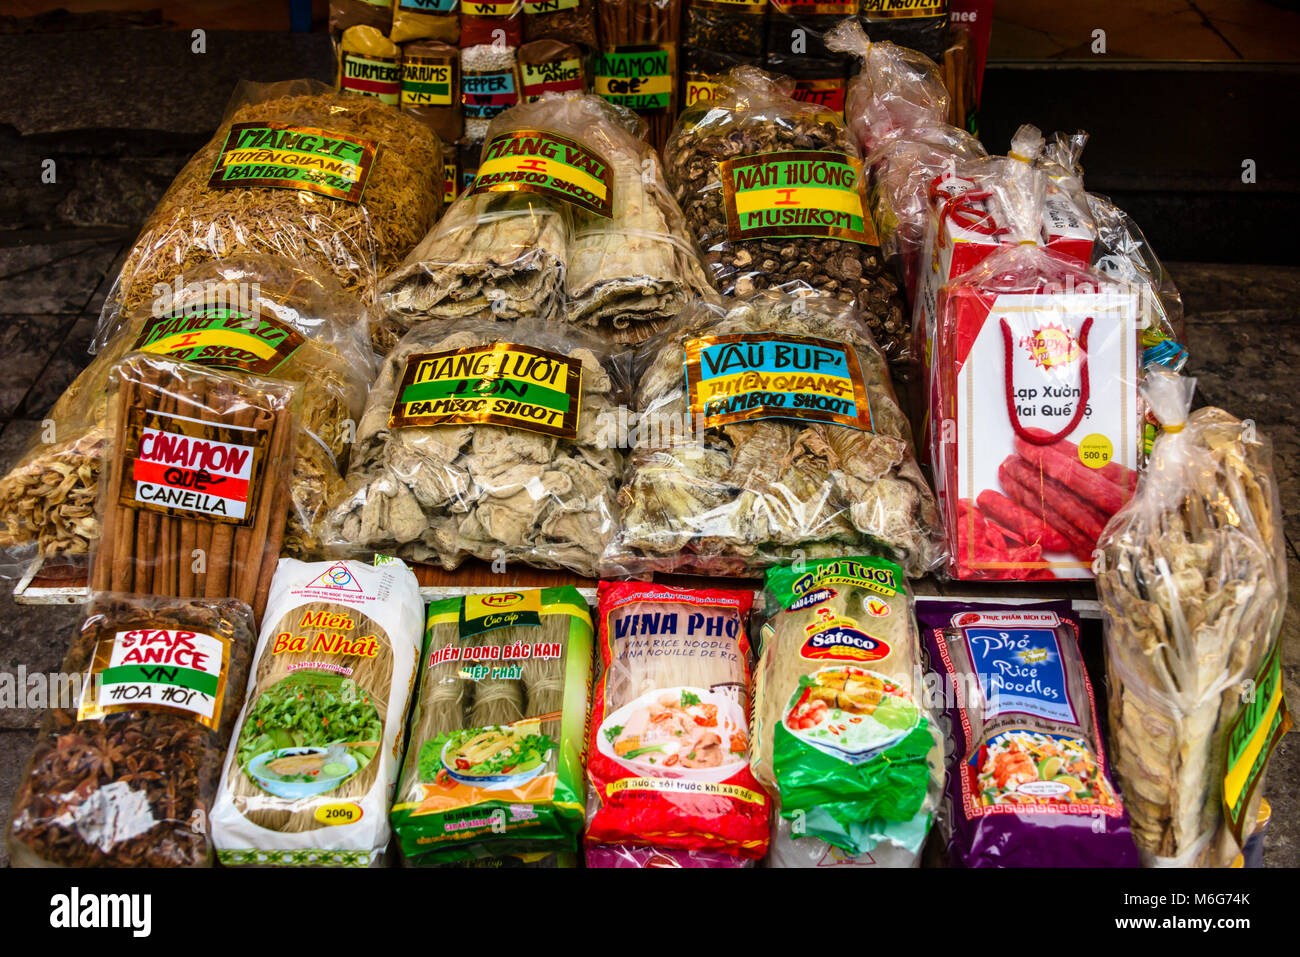 Spices, dried bamboot shoots and rice noodles for sale in Hanoi, Vietnam Stock Photo